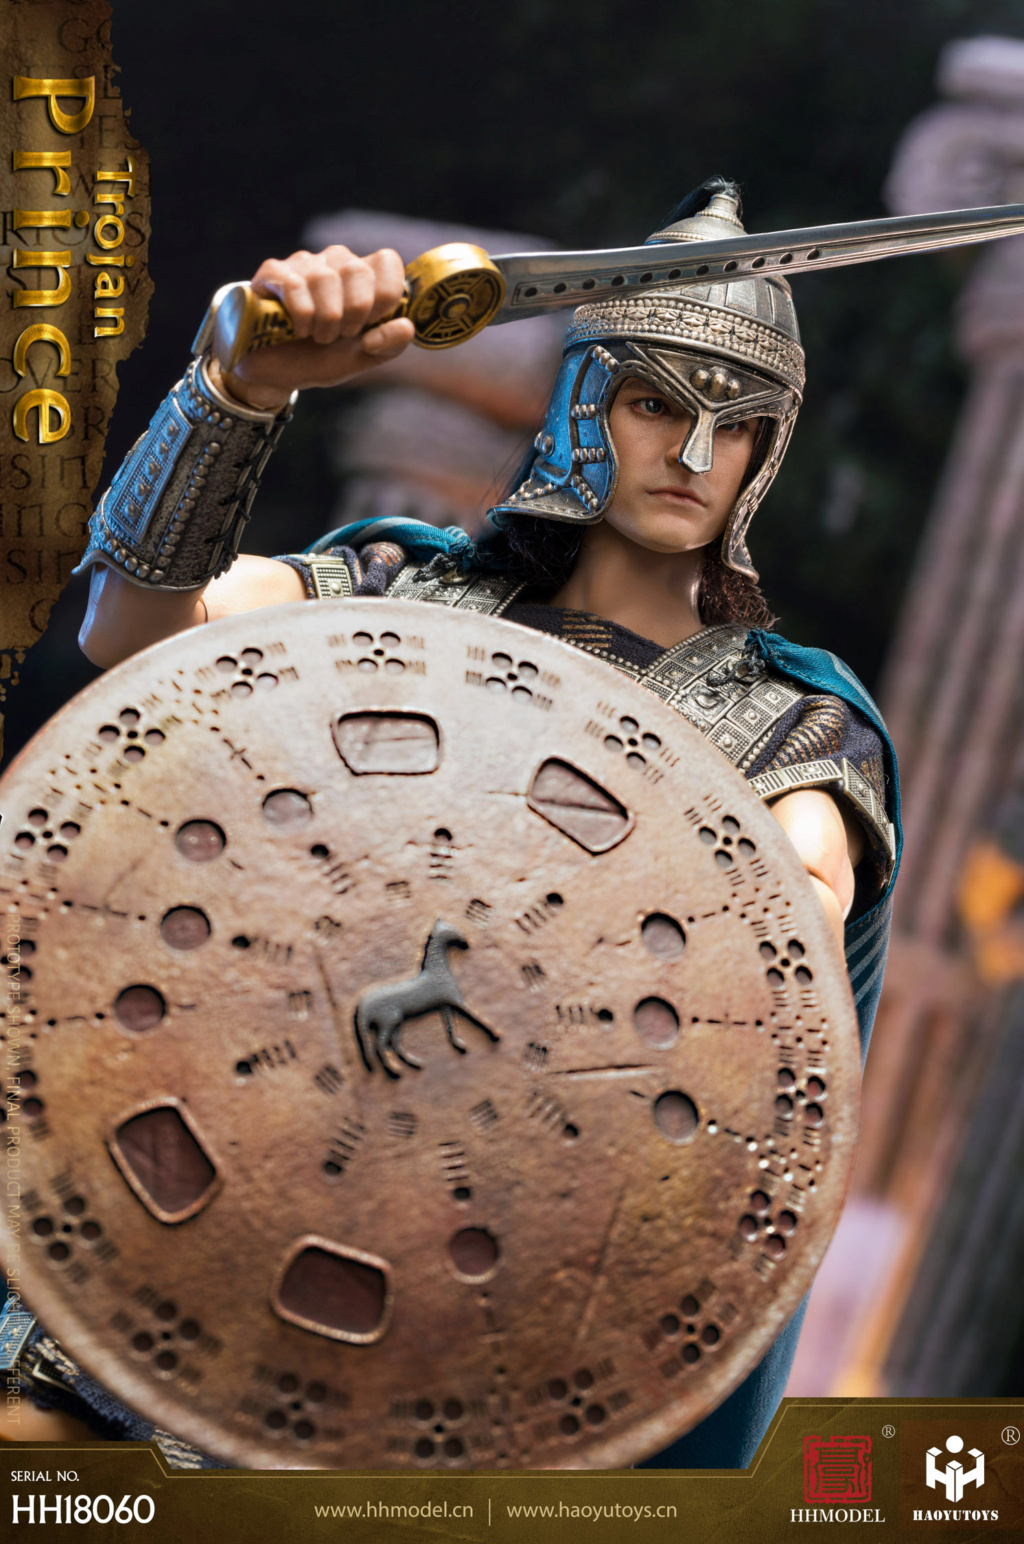 NEW PRODUCT: HHMODEL & HAOYUTOYS: 1/6 Empire Legion - Troy Prince Action Figure #HH18060 16281212